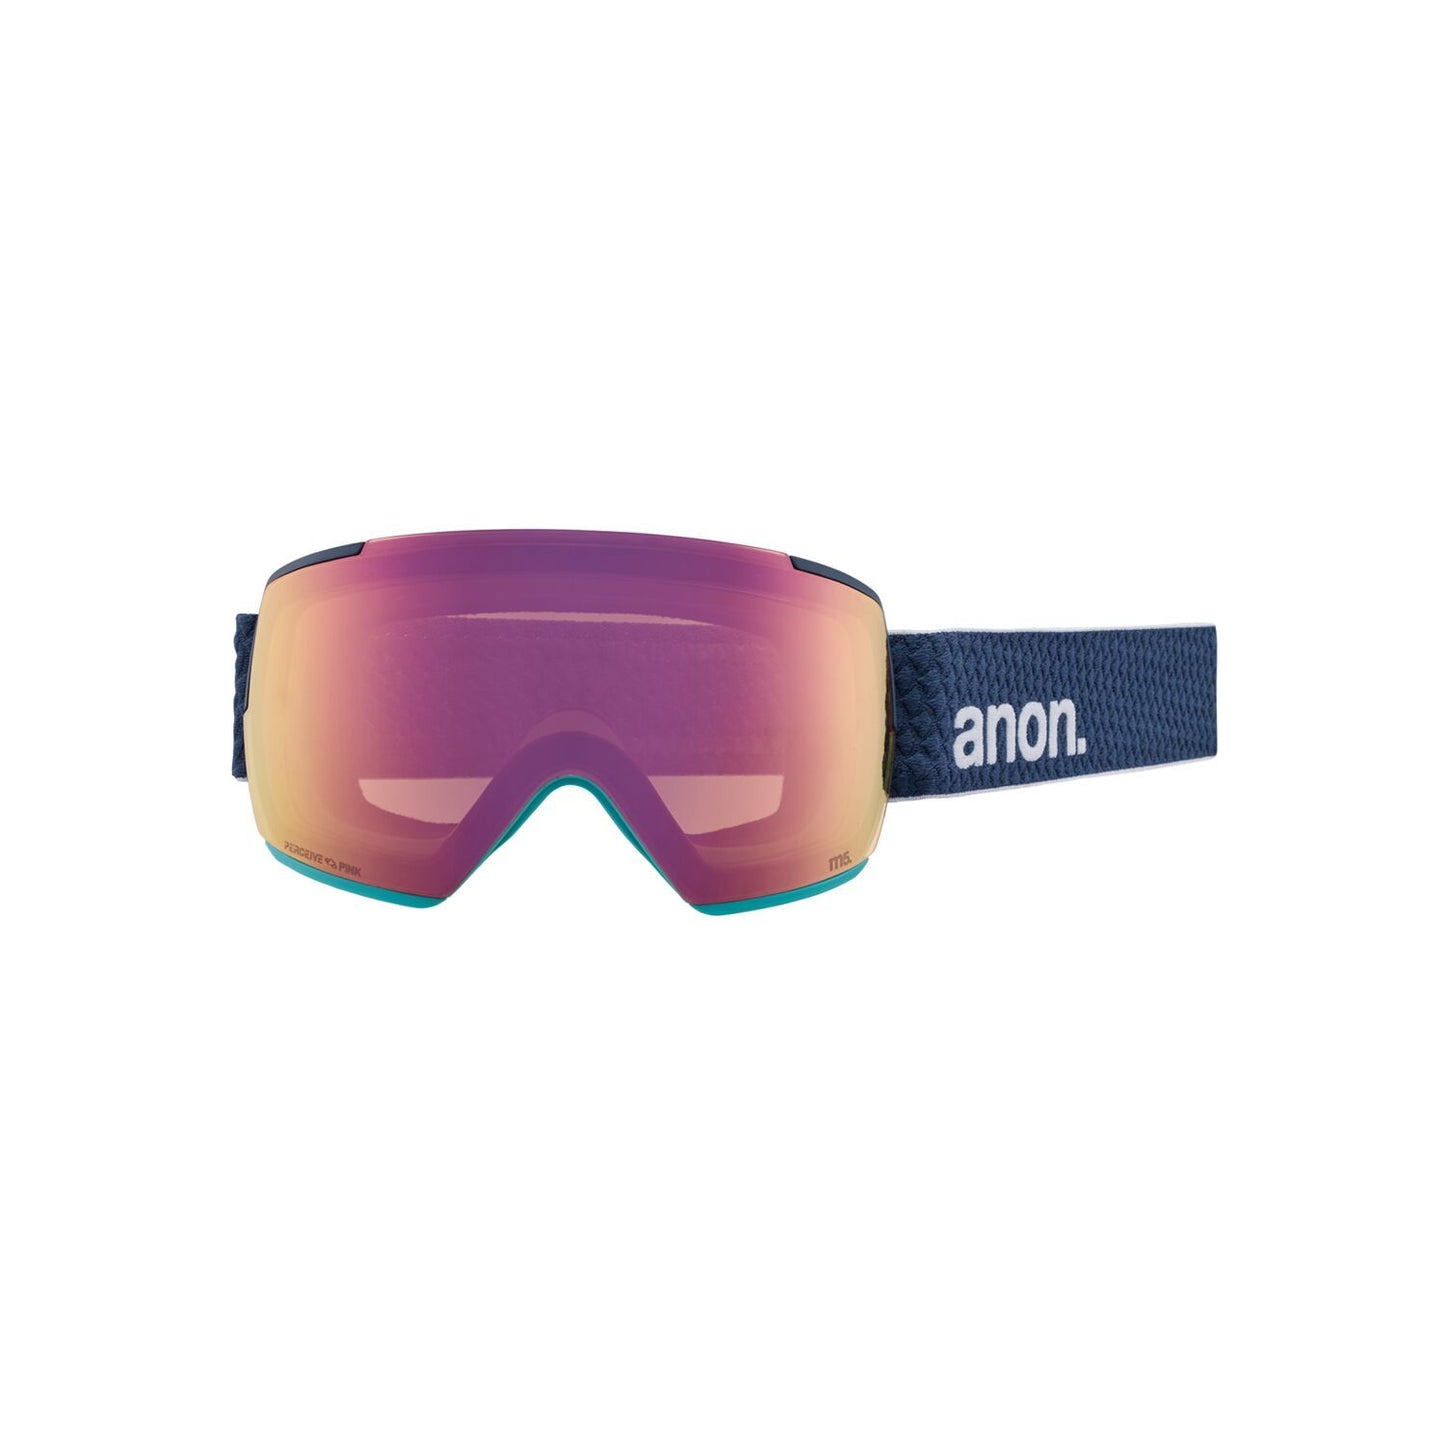 Anon M5 Snow Goggles Nightfall Perceive Variable Blue Snow Goggles